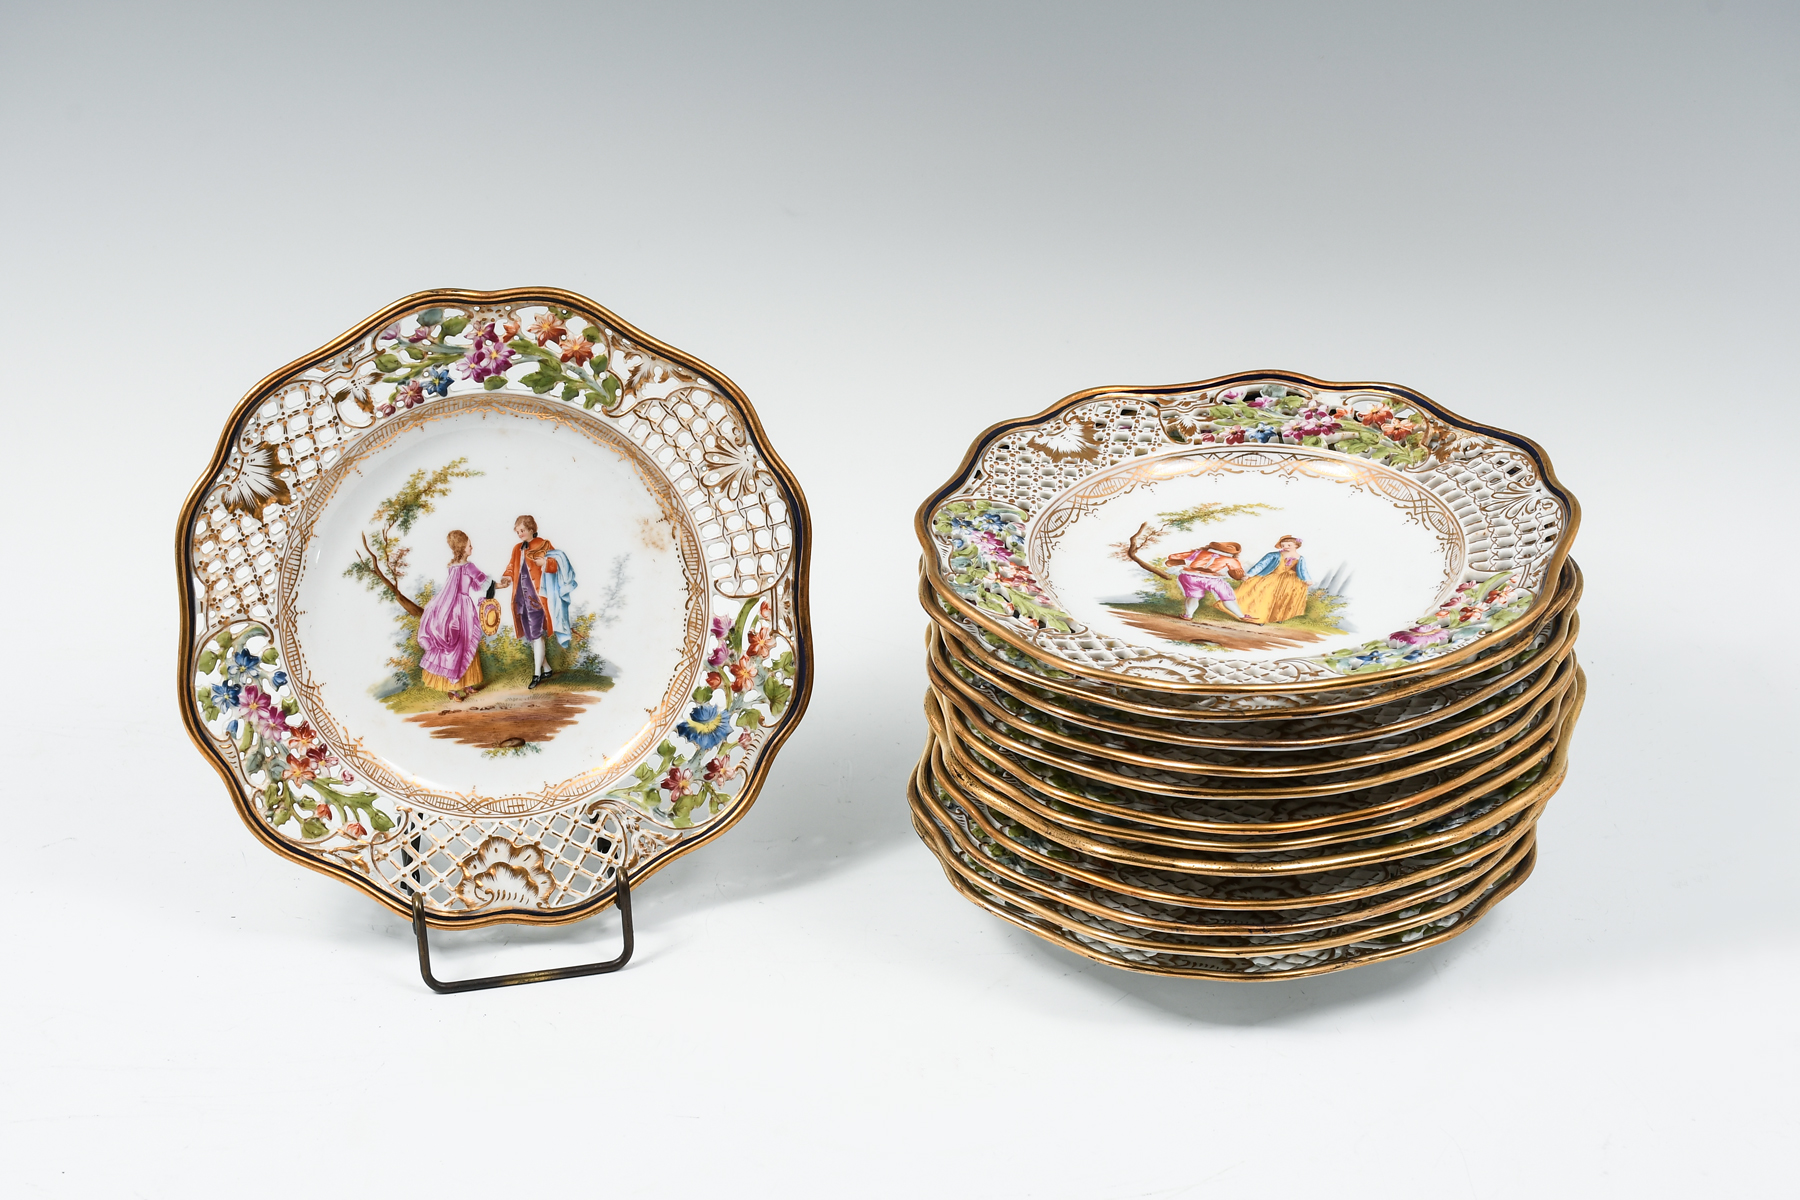 13 PC. RETICULATED DRESDEN FIGURAL PLATES: